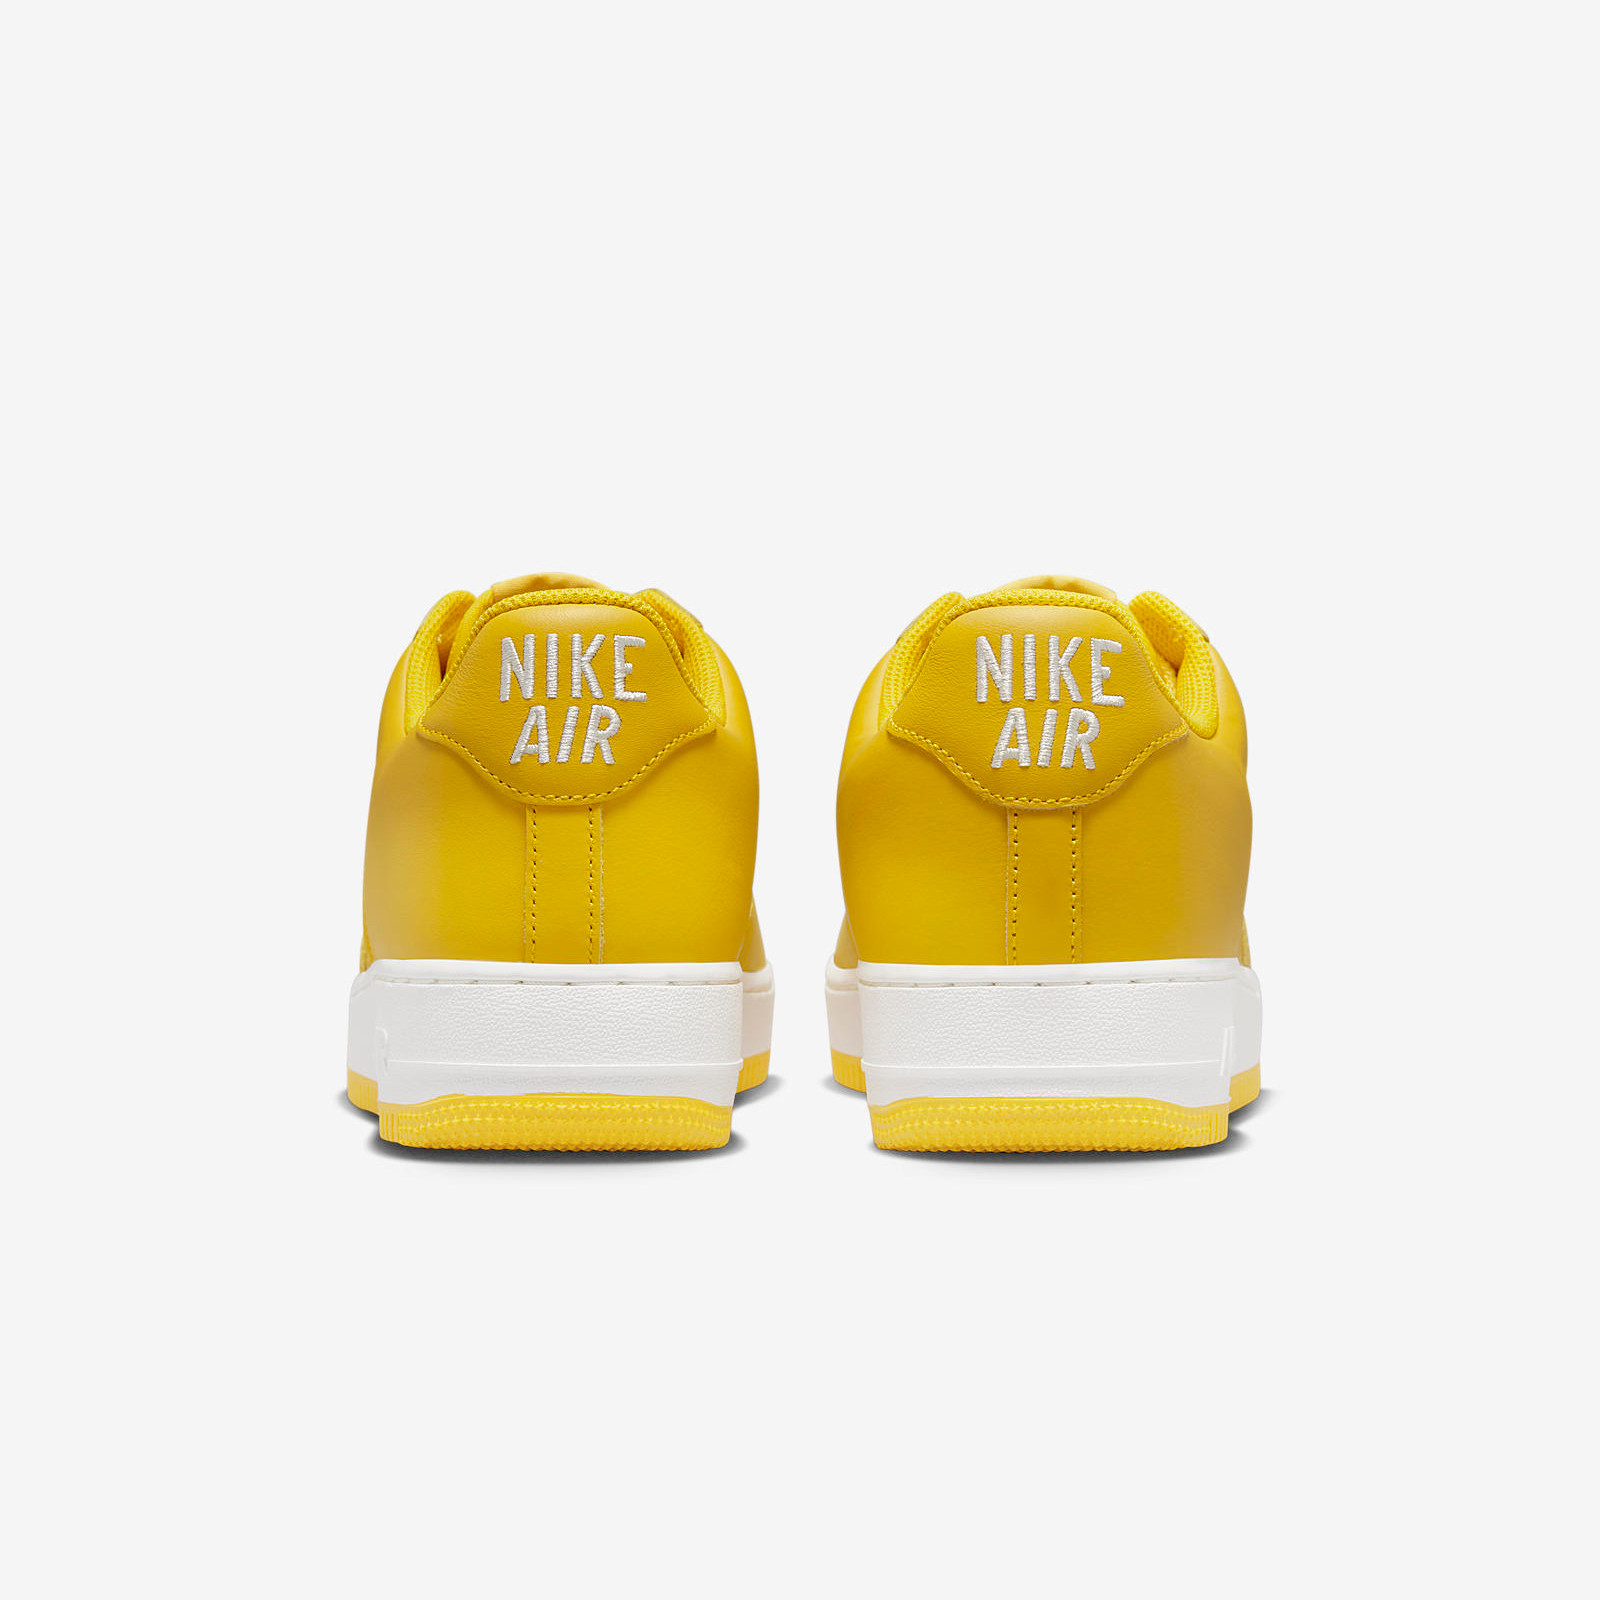 Nike Air Force 1
Color of the Month
« Speed Yellow »